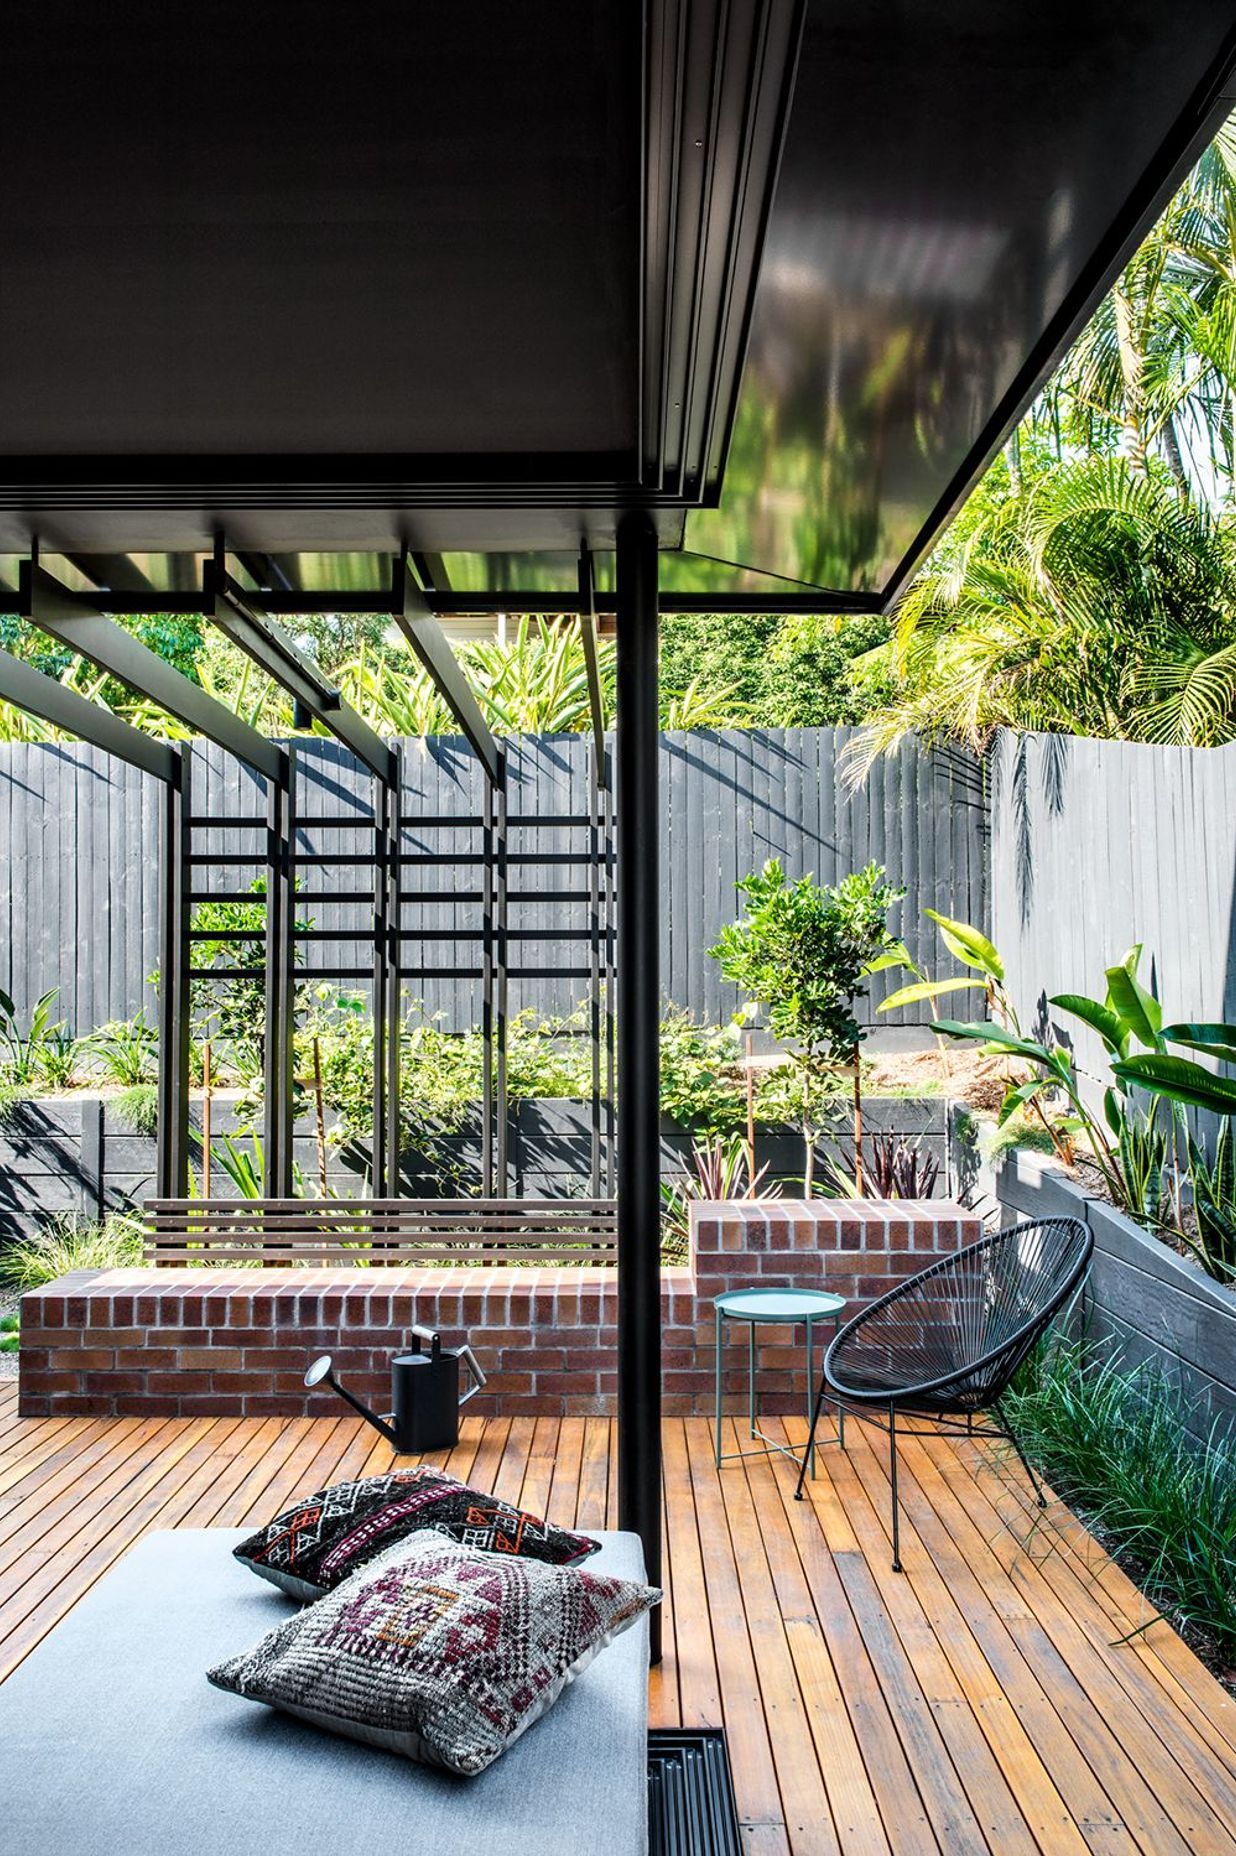 Photography: Cathy Schusler | Living spaces extend into the landscape through the use of full height sliding doors, which genuinely connect the inside and outside.